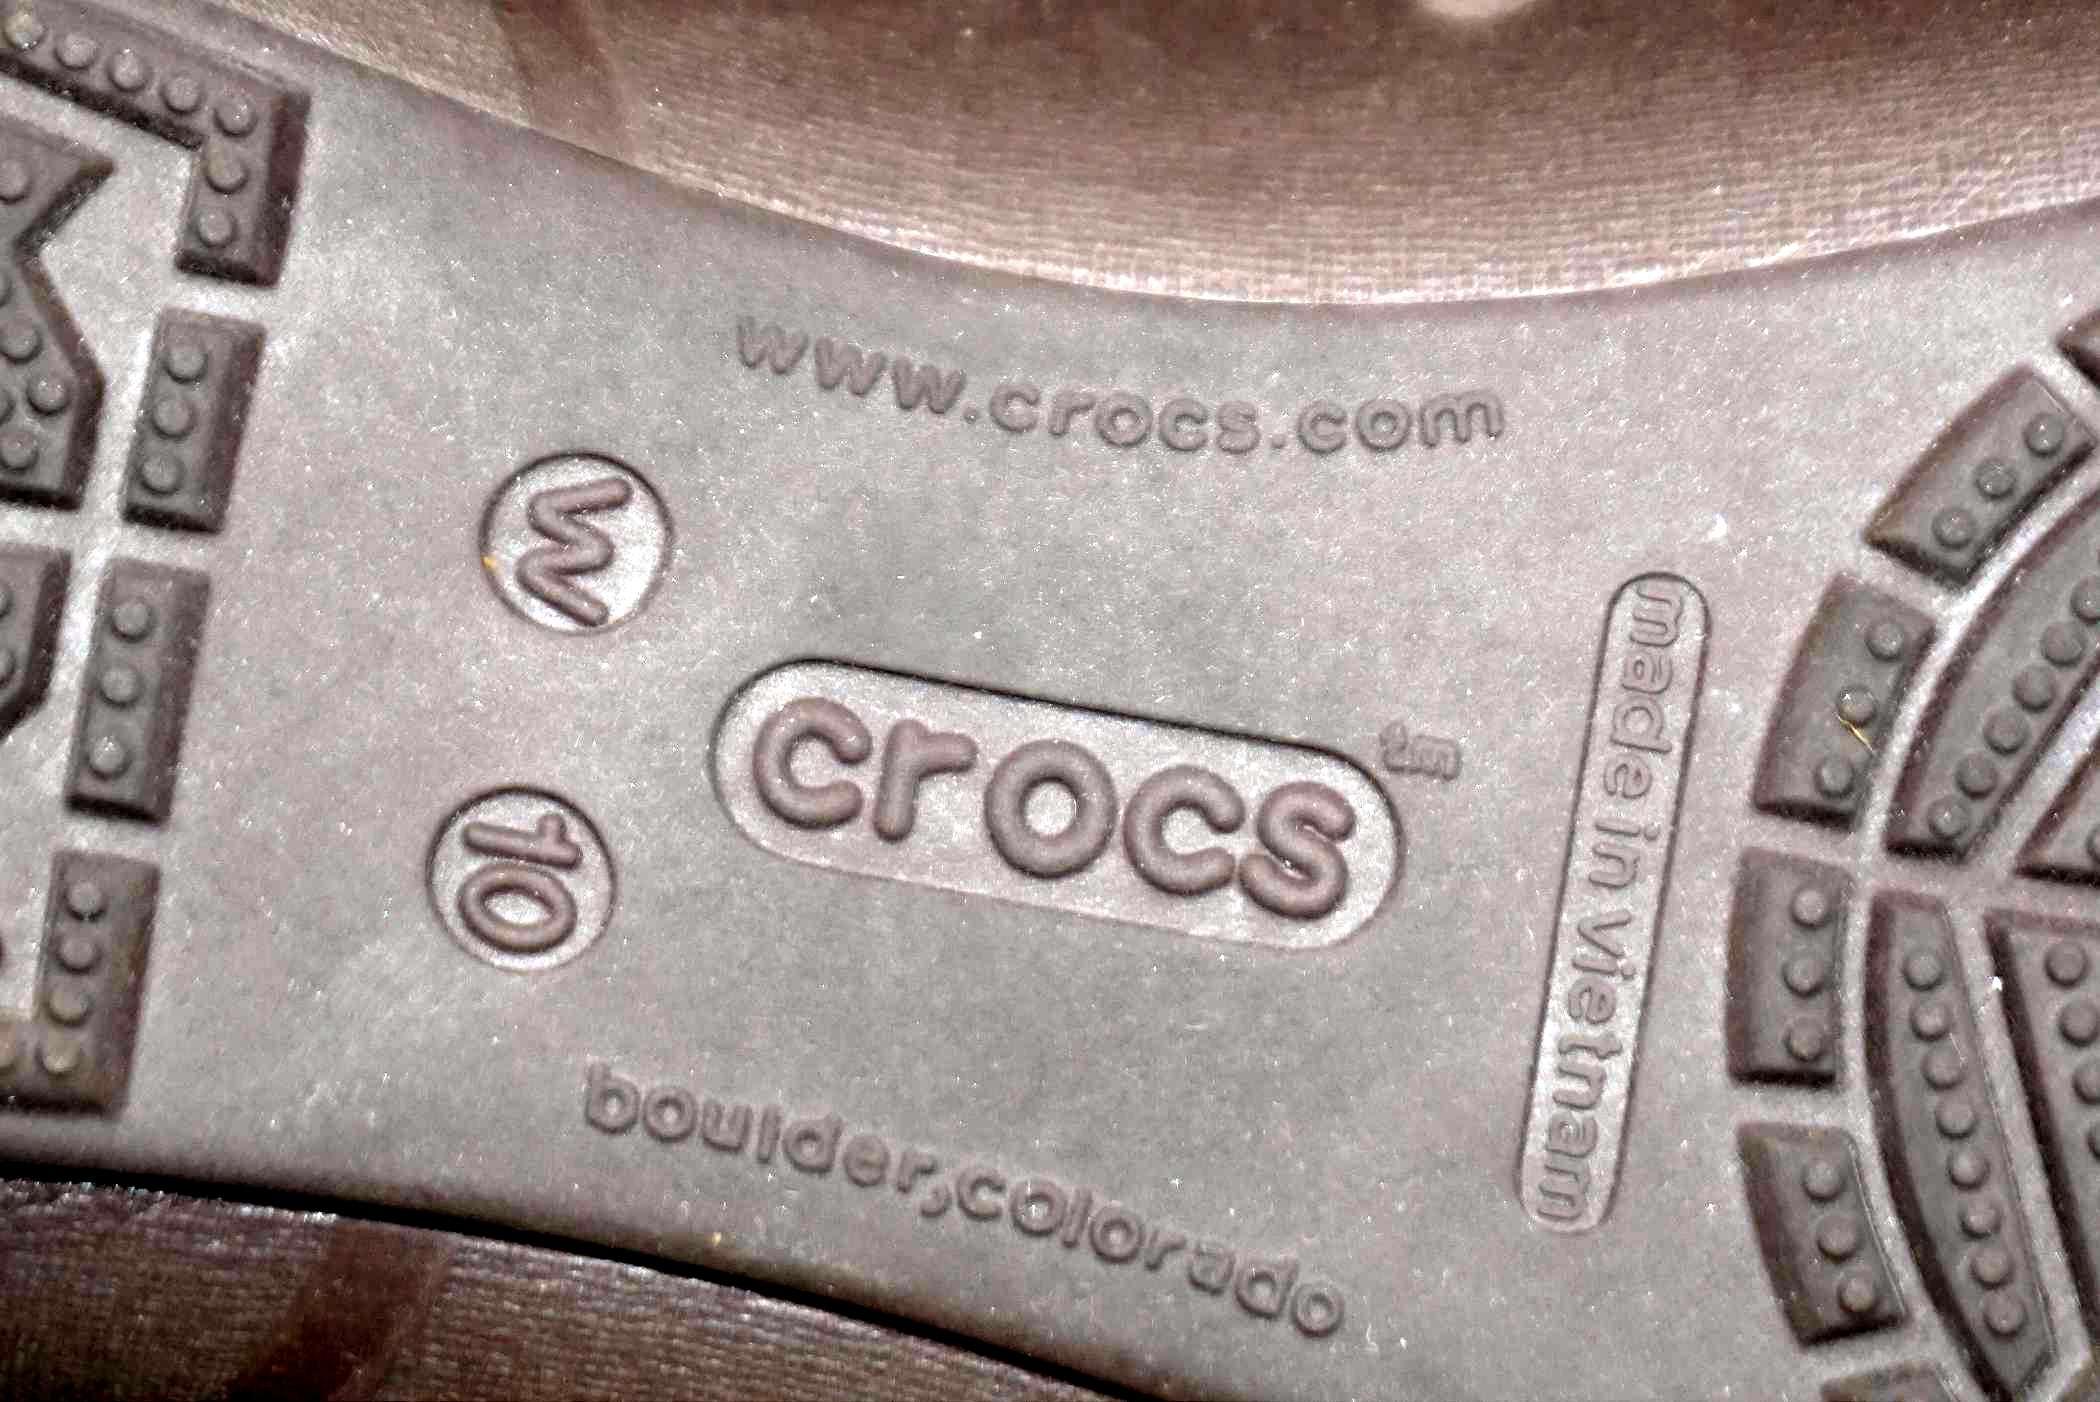 2 Pairs Of Shoes - Crocs (Size 10)